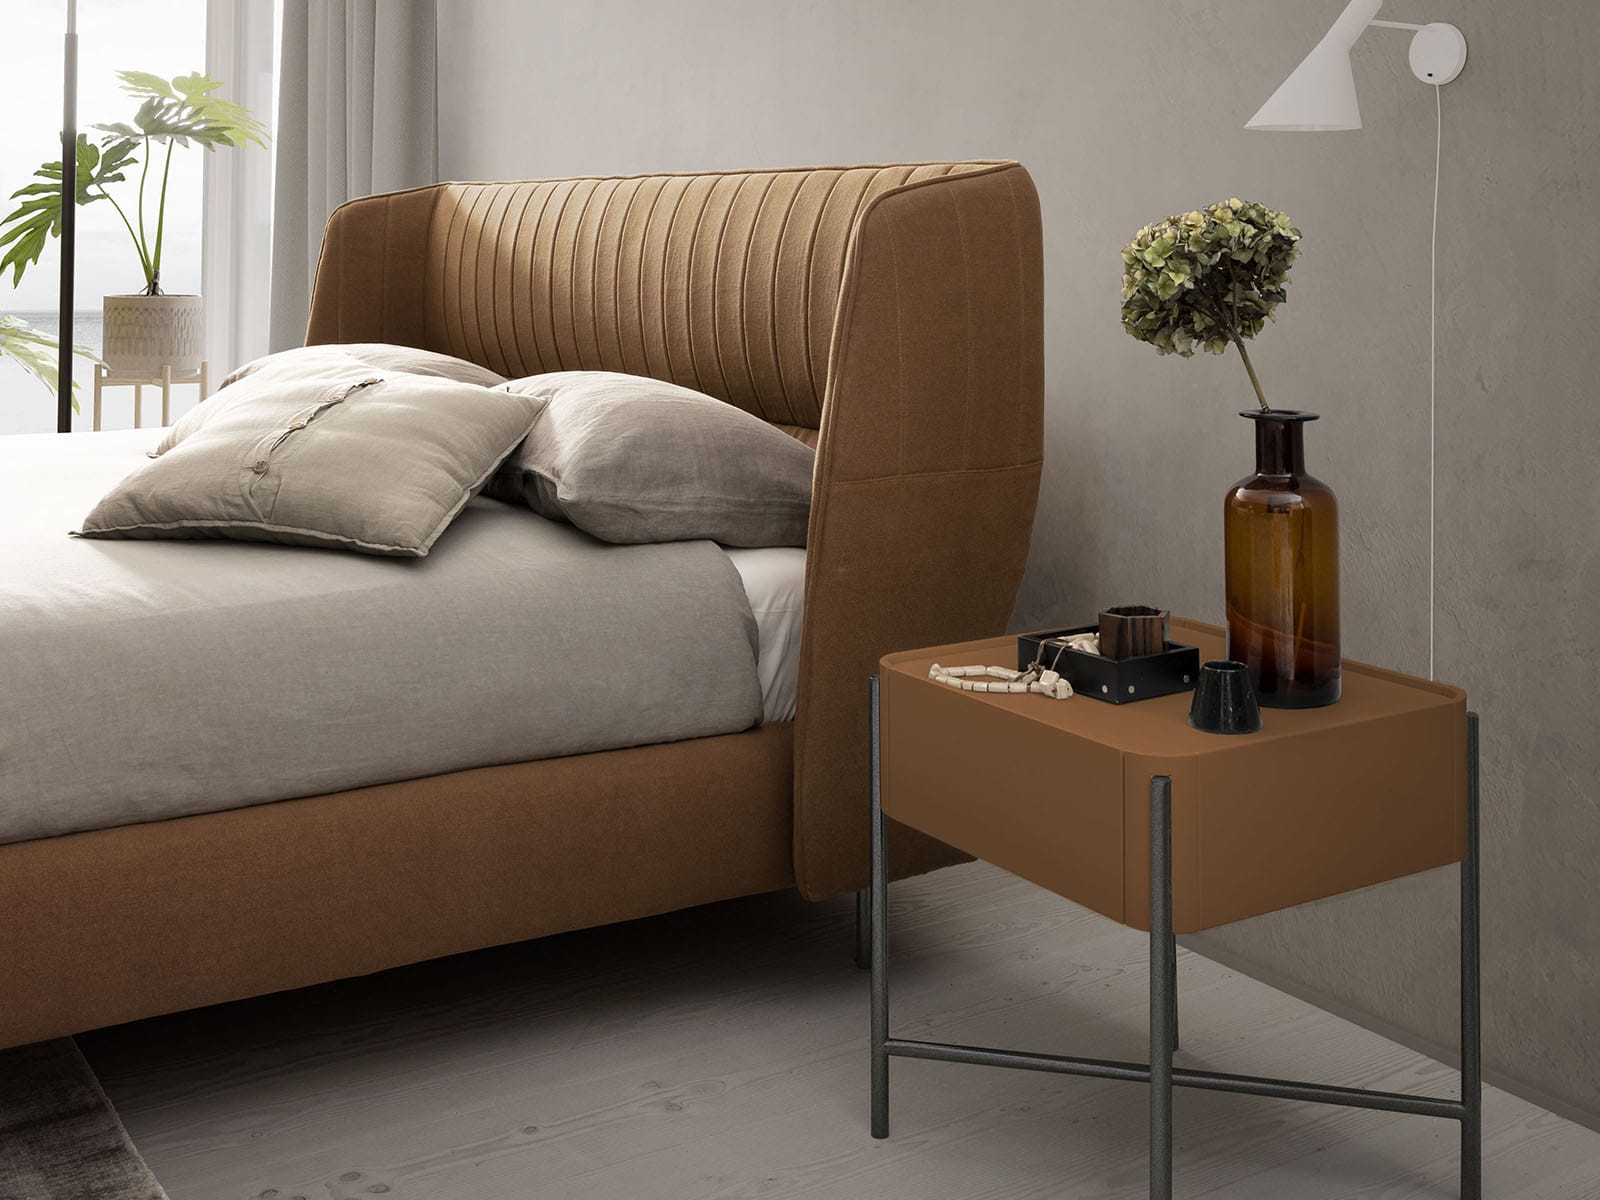 The Fluttua Bed | The floating bed